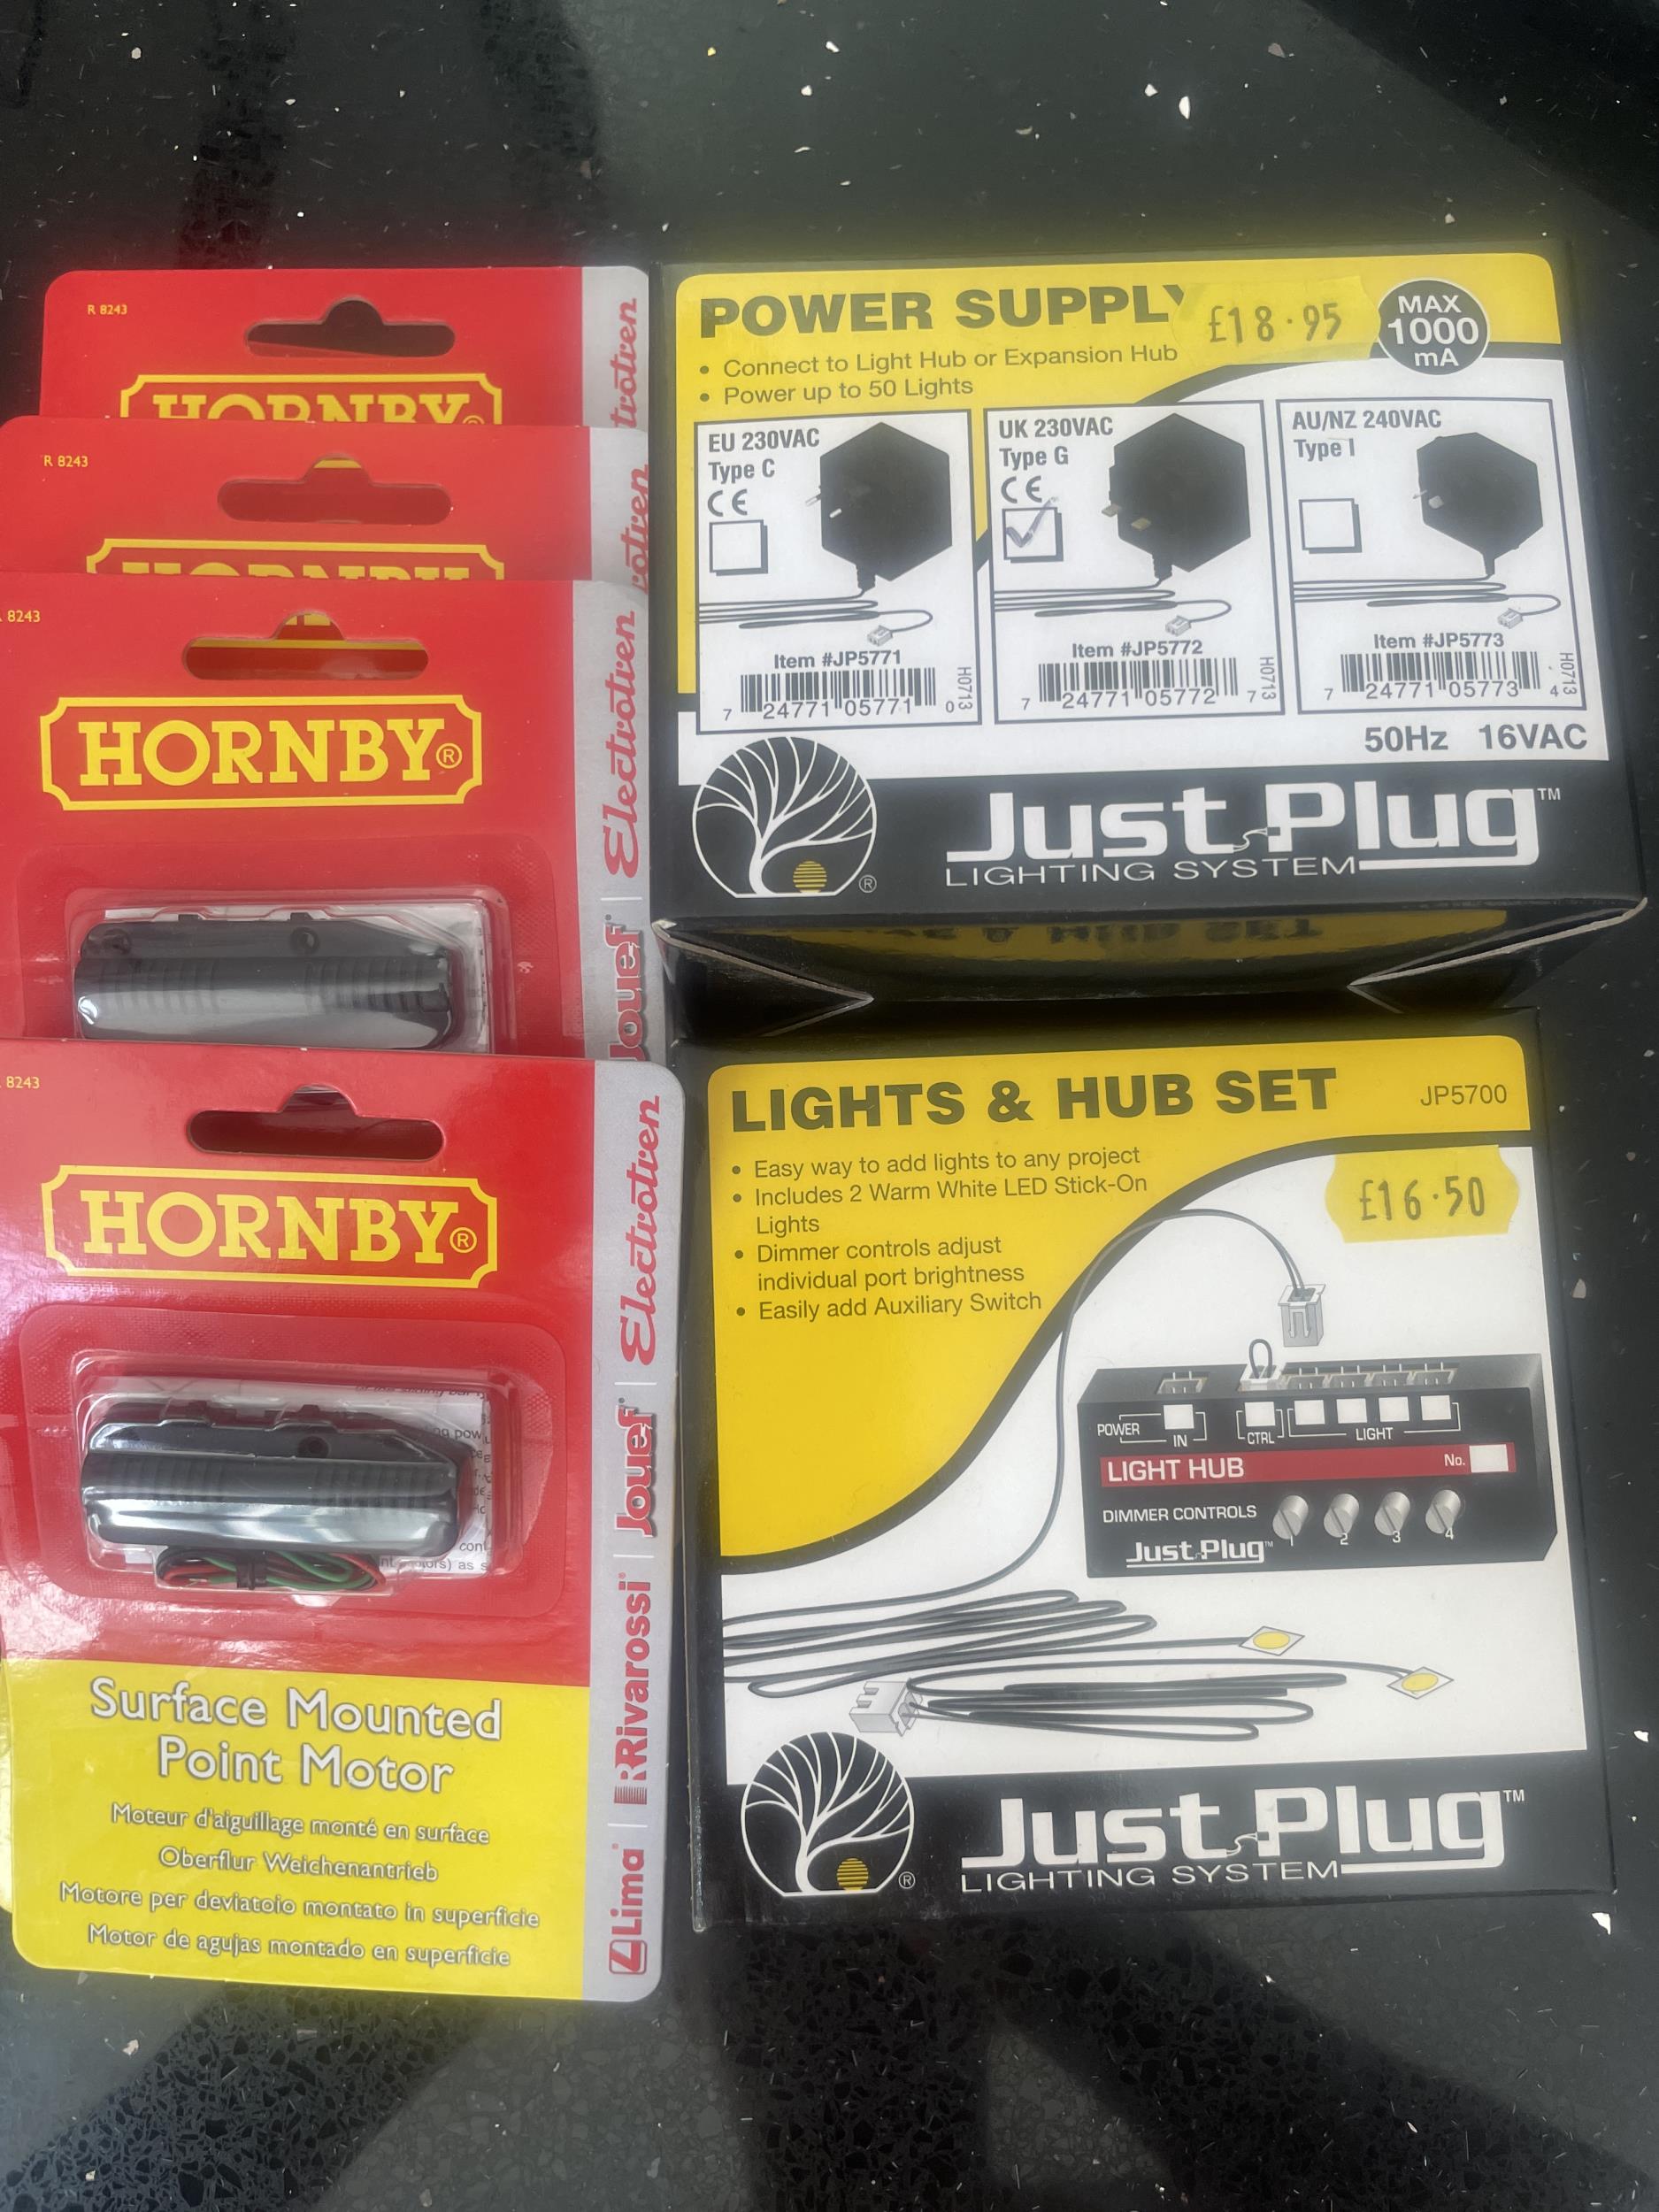 VARIOUS AS NEW MODEL RAILWAY ELECTRICALS TO INCLUDE POWER SUPPLY, LIGHTS AND HUB SET AND SIX SURFACE